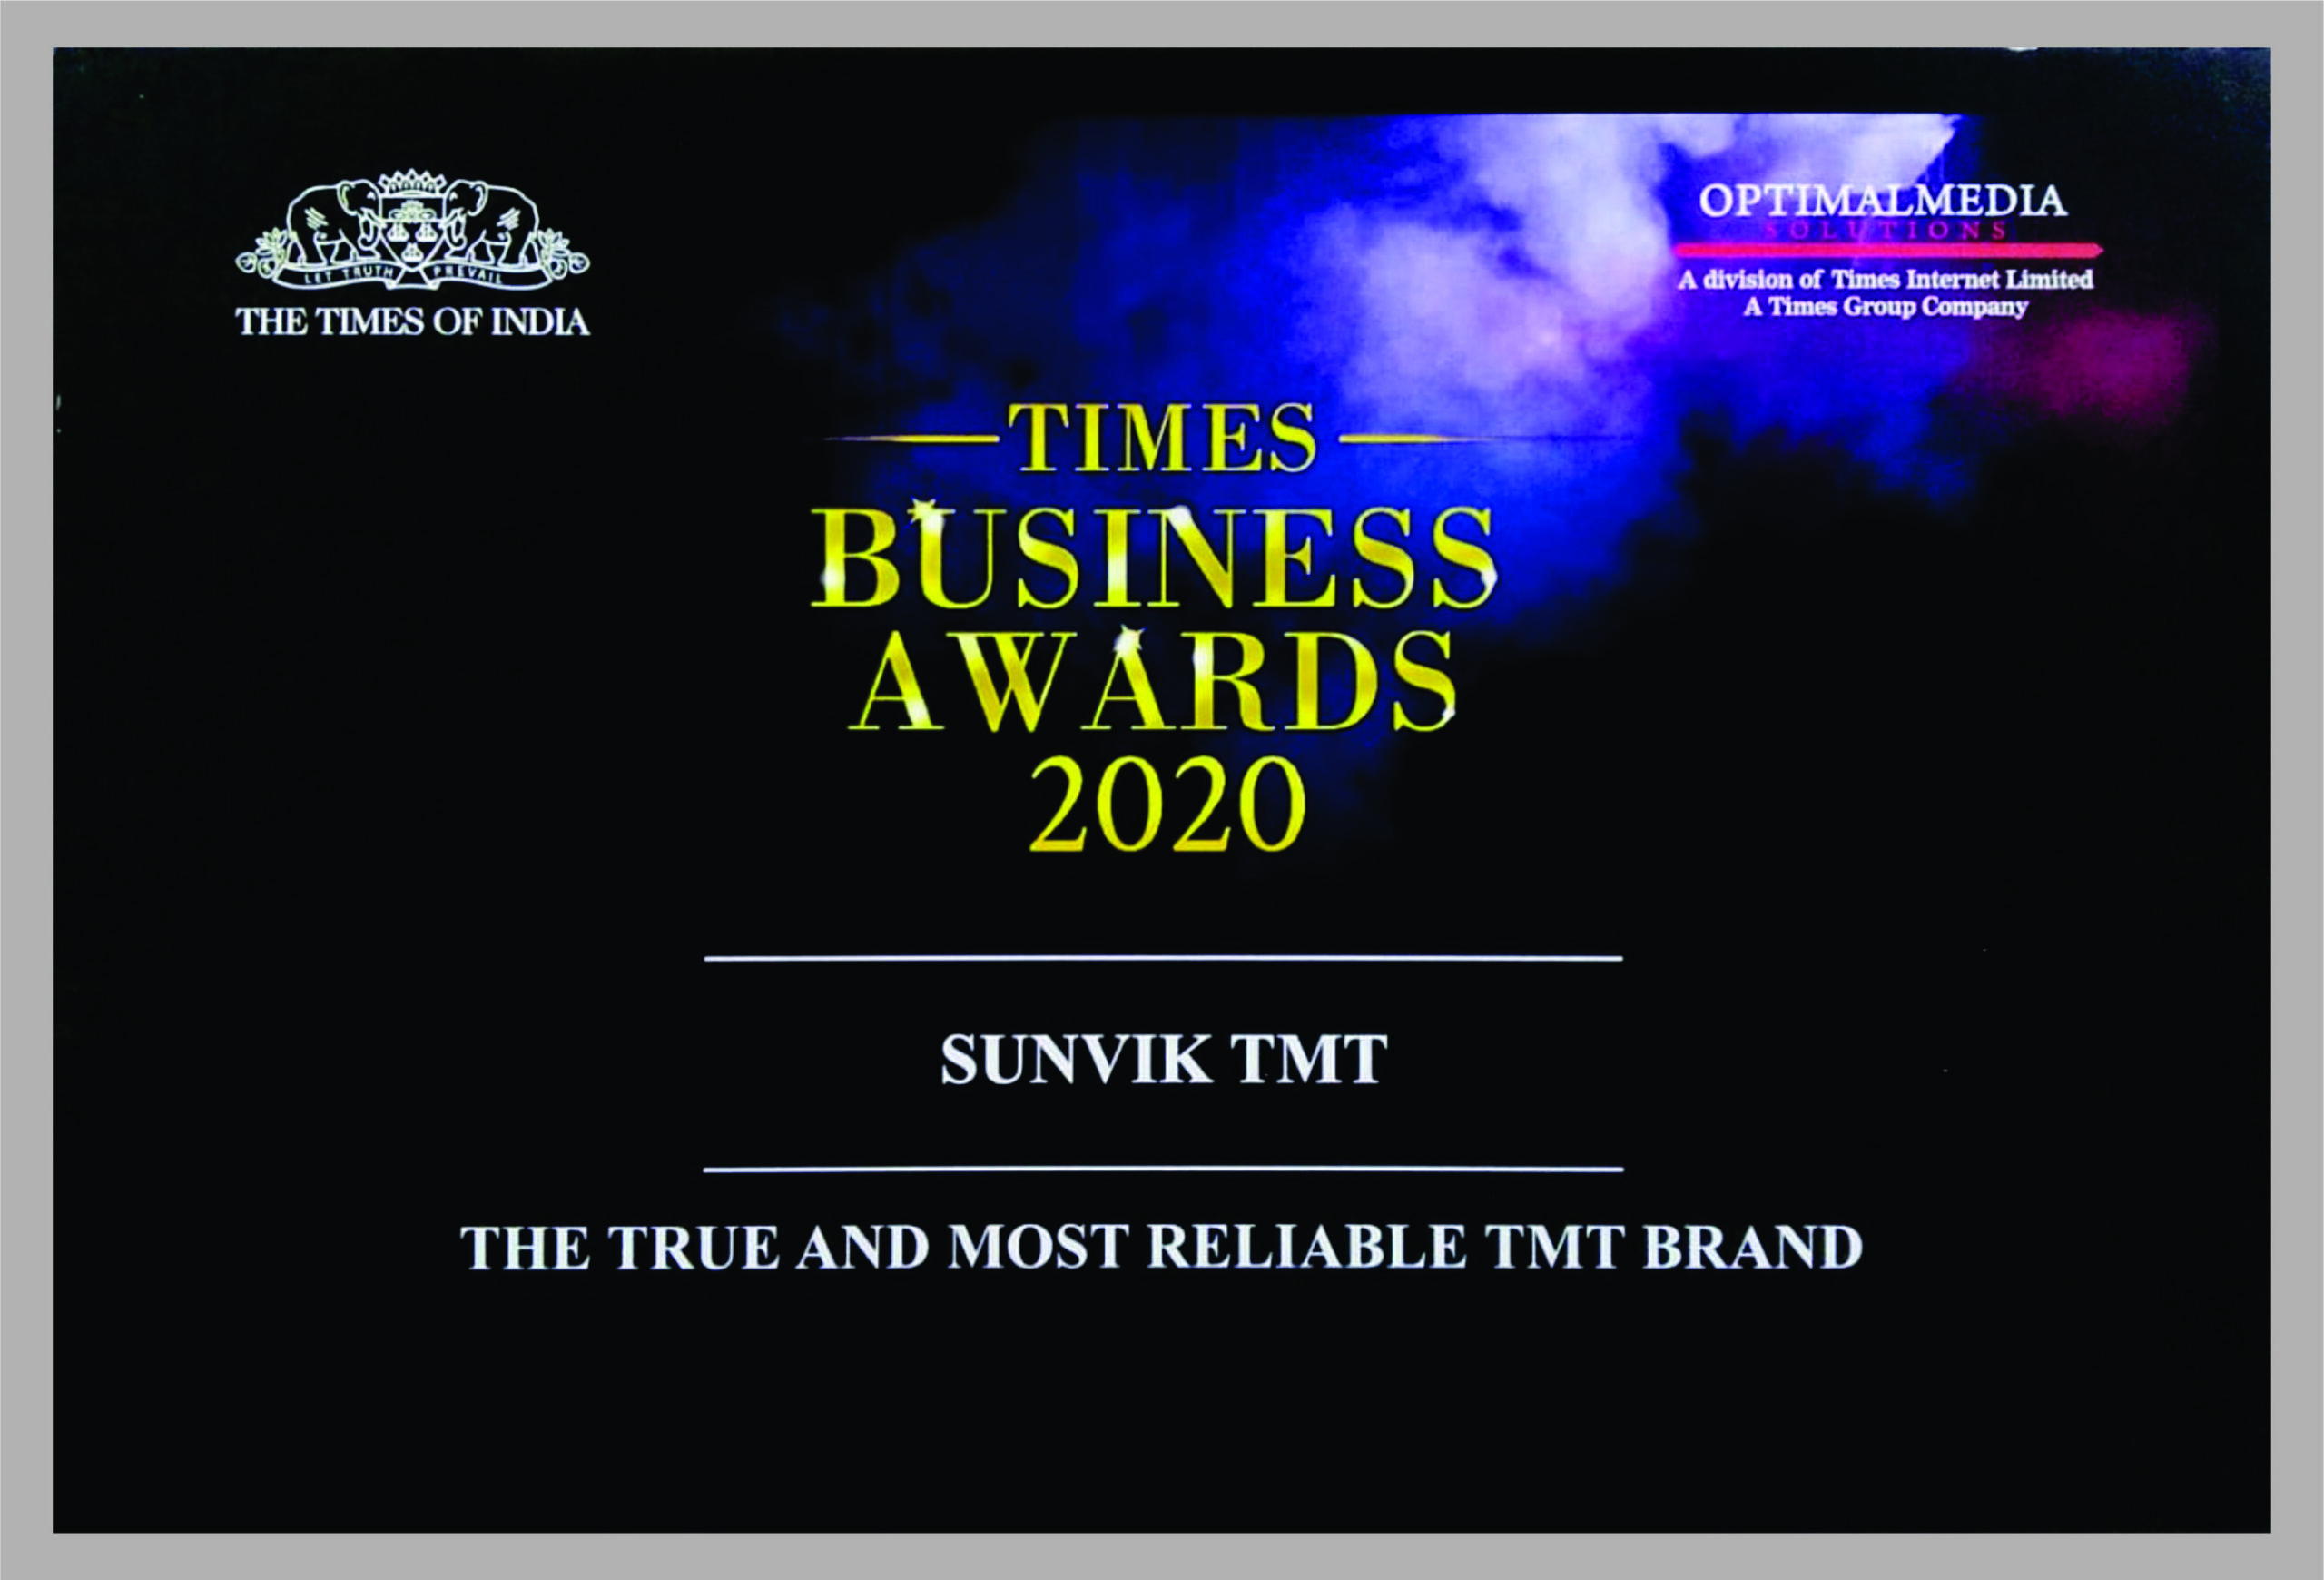 Times Business Awards 2020